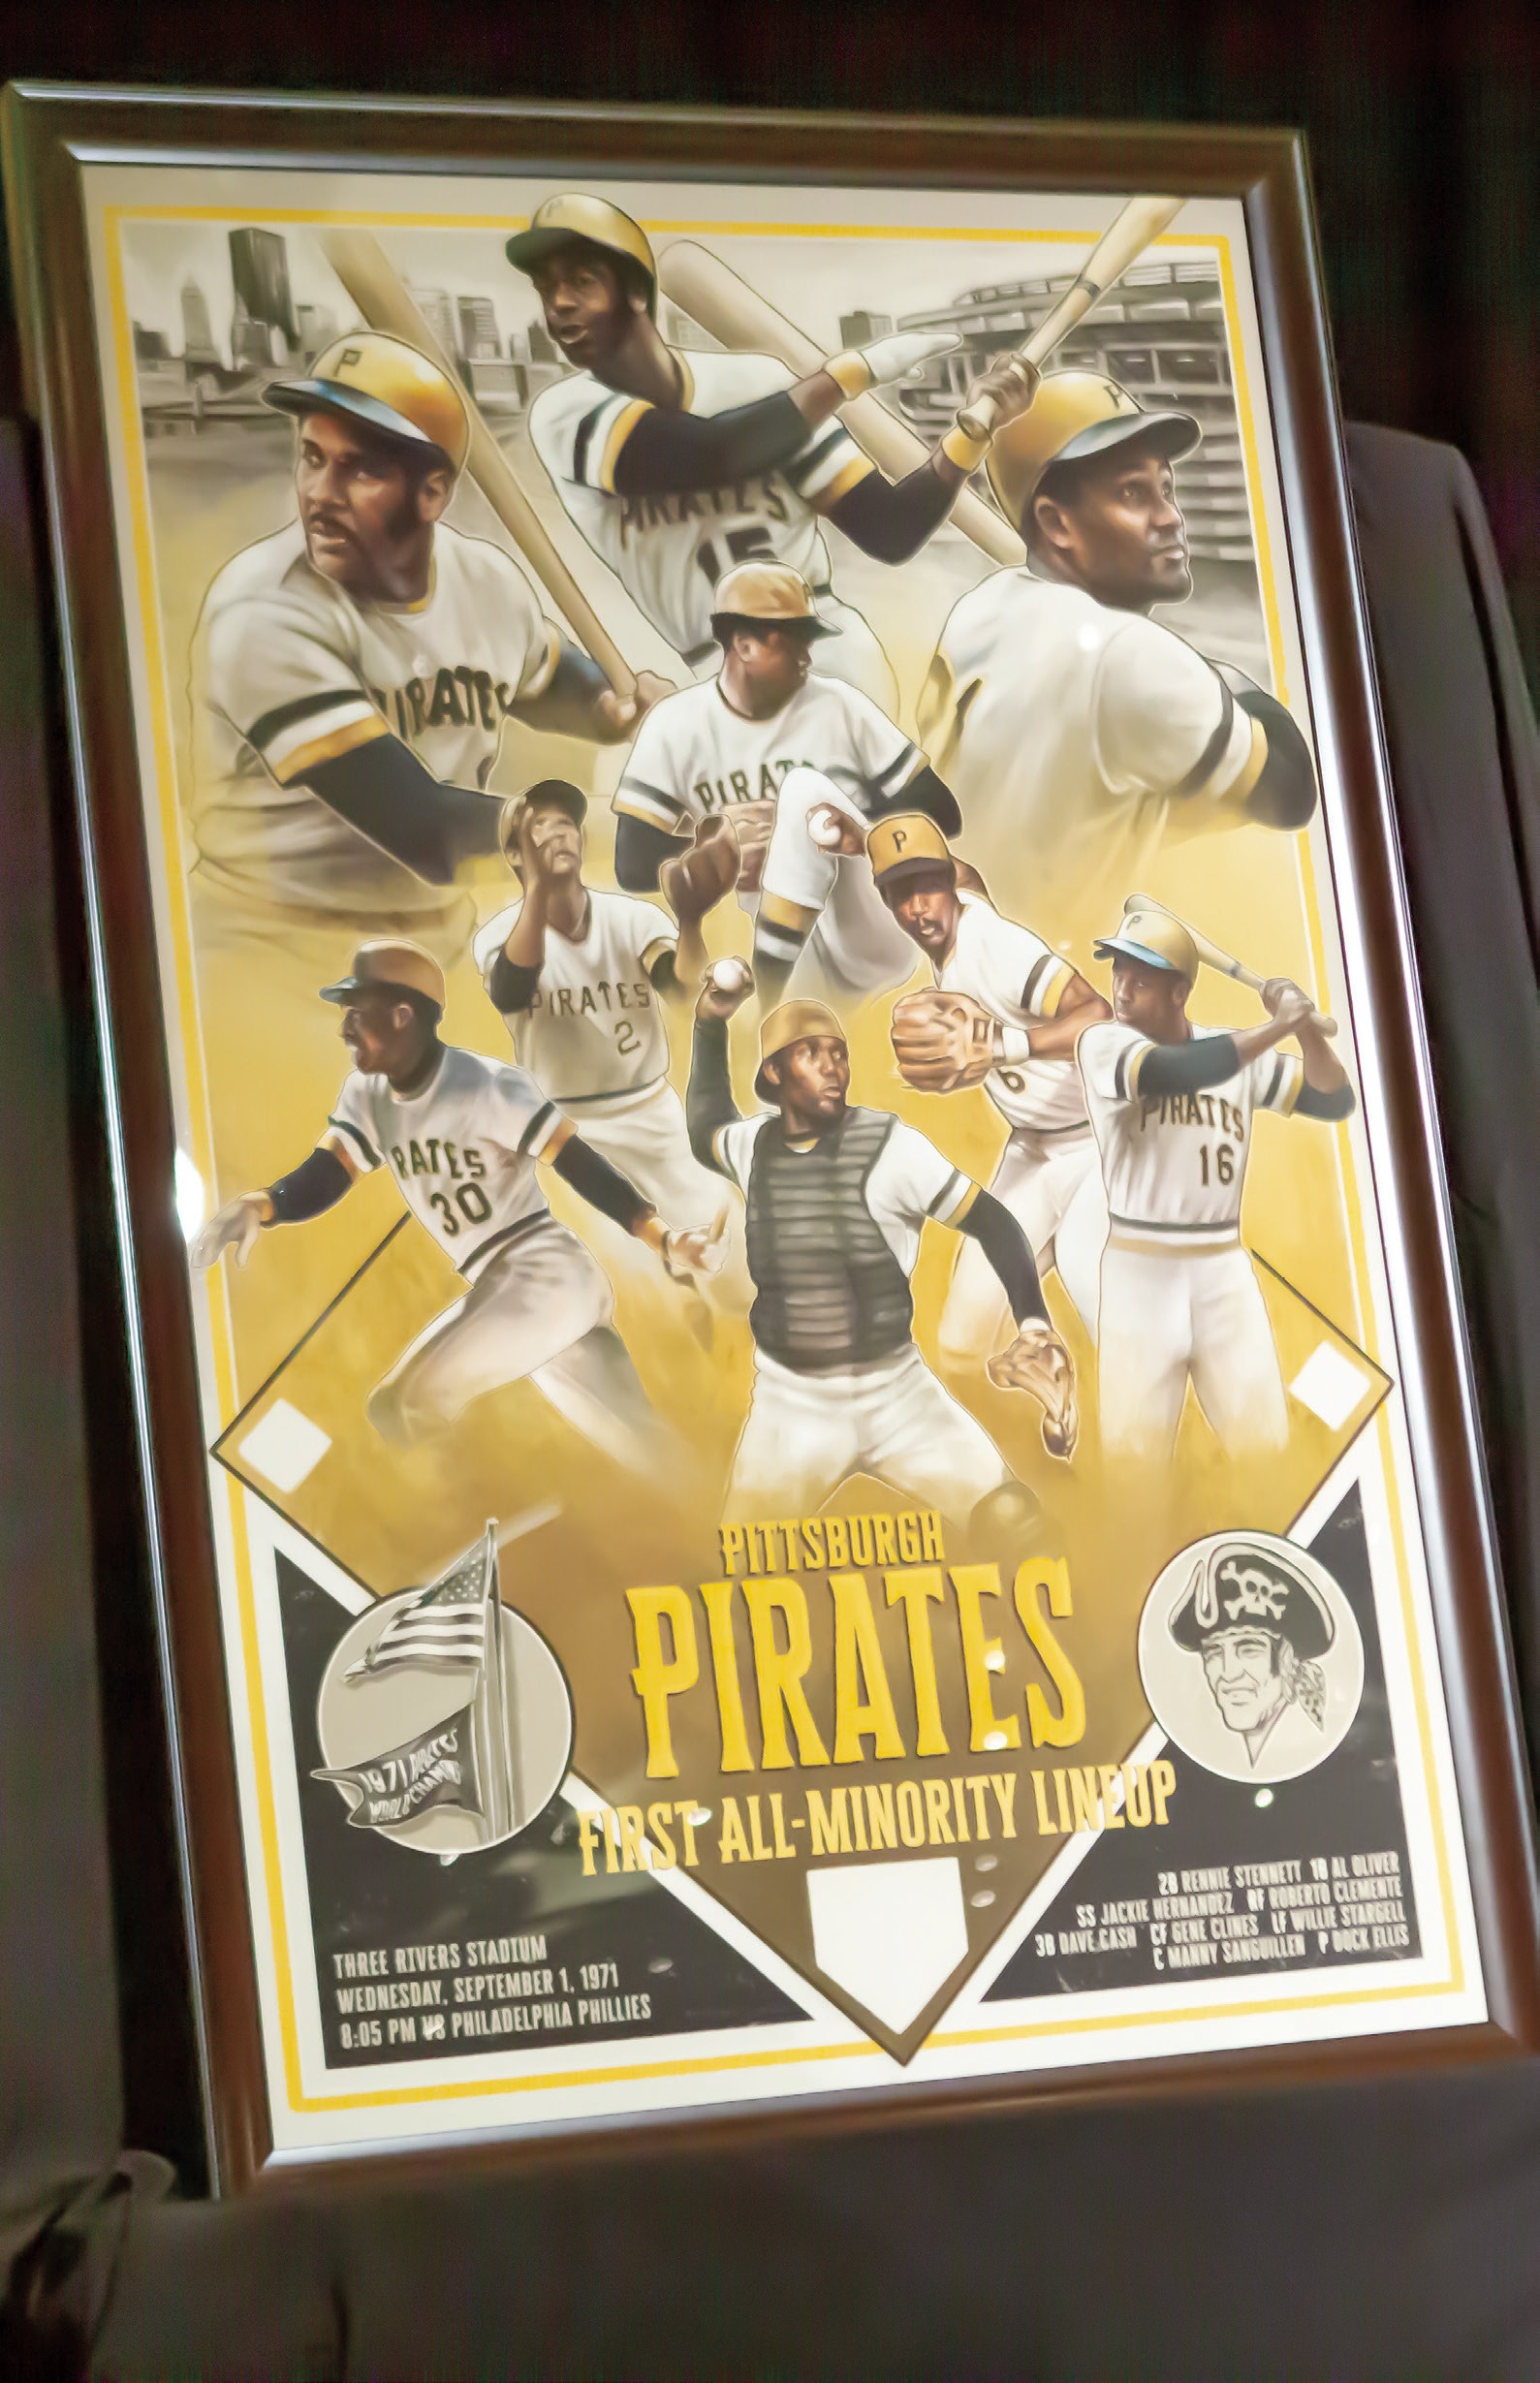 On Sept. 1, 1971, the Pirates made history with baseball's 1st all